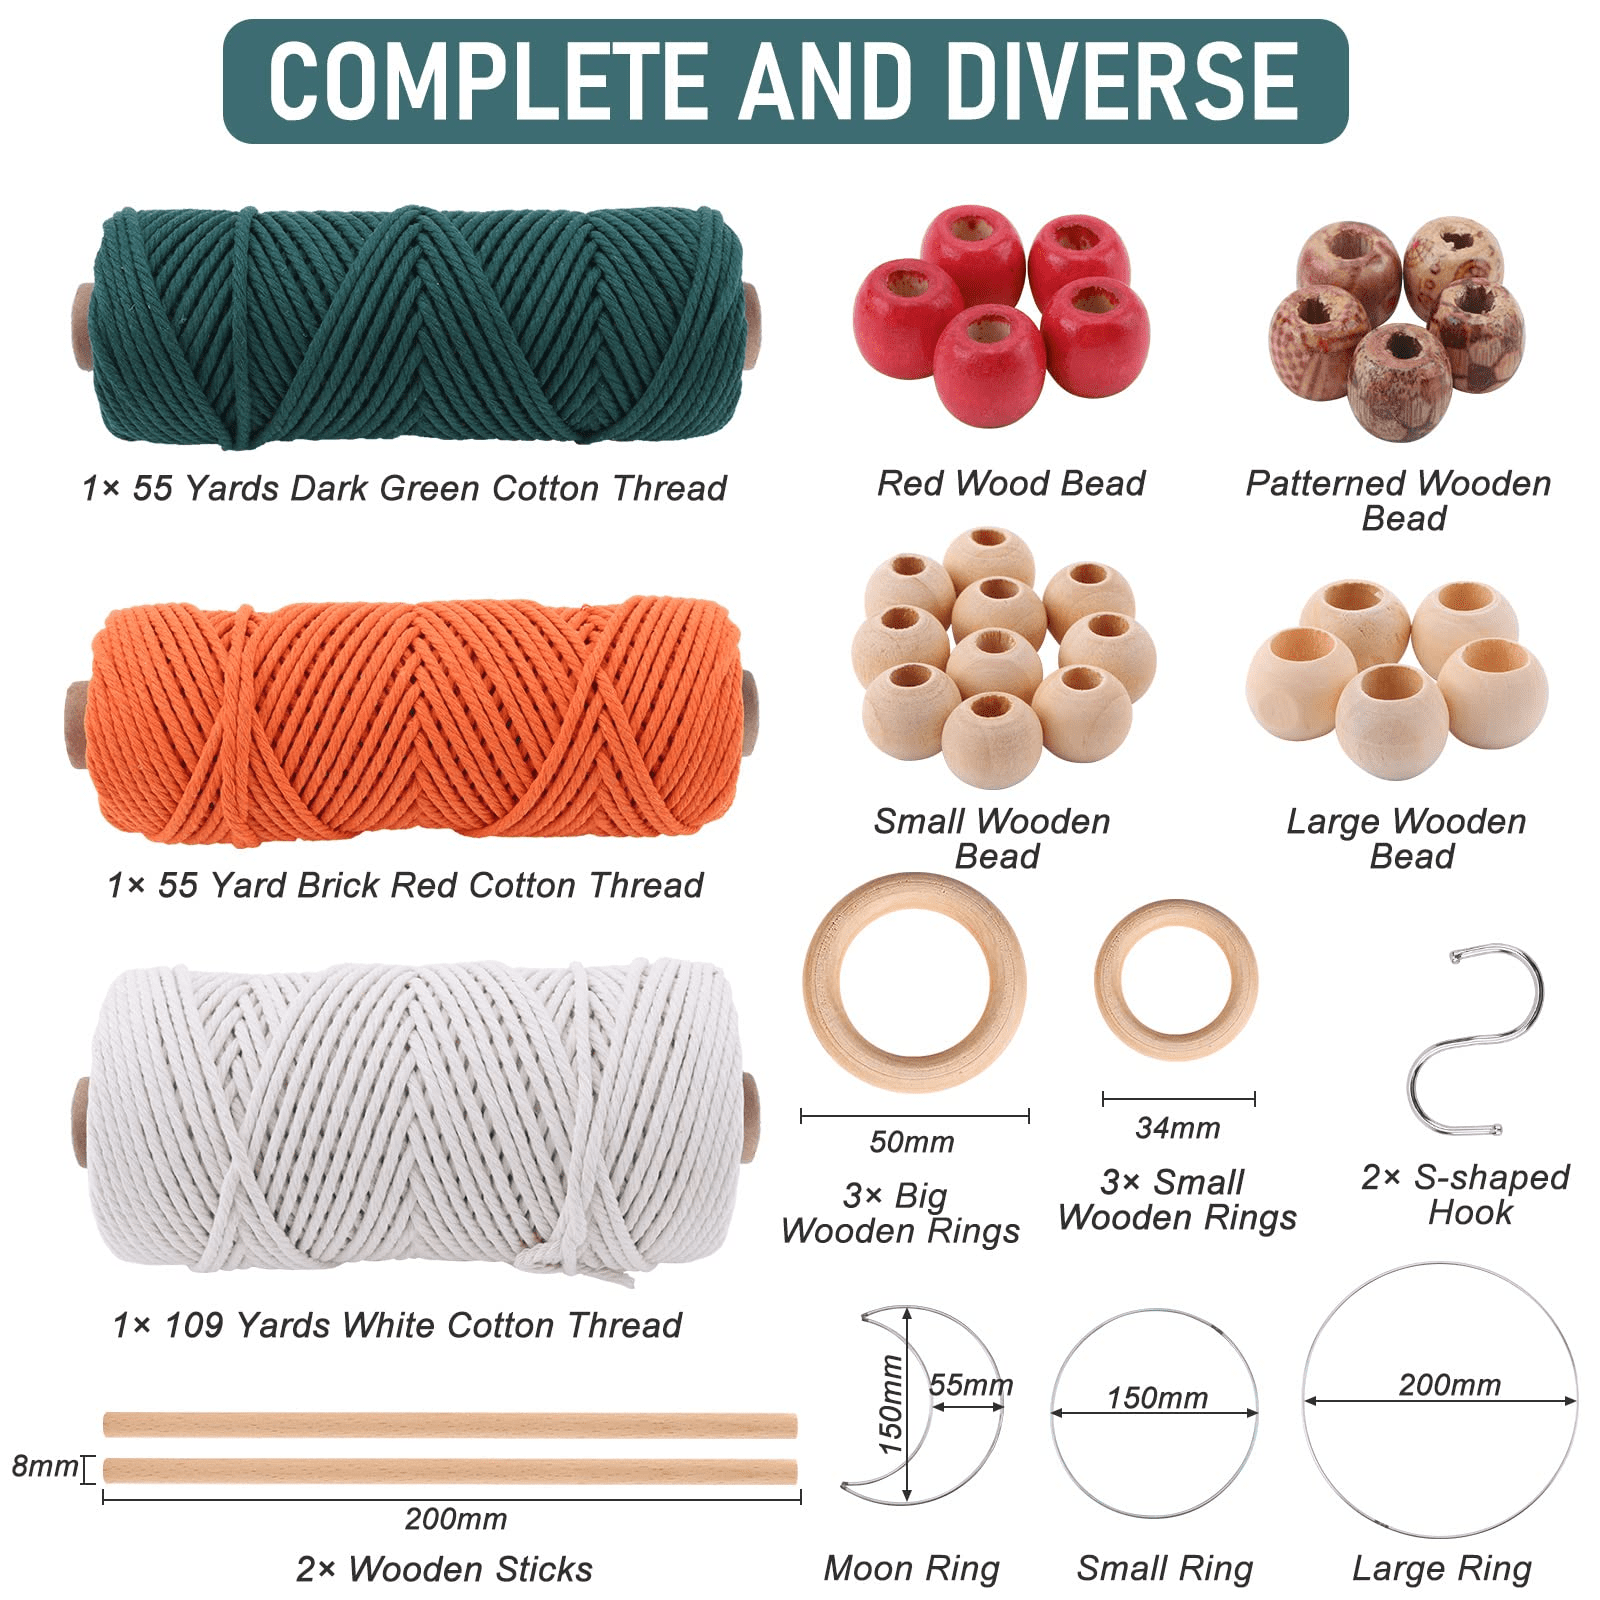 MADE FOR RETAIL Macrame Kit - Rings, Yarn and Instructions - New